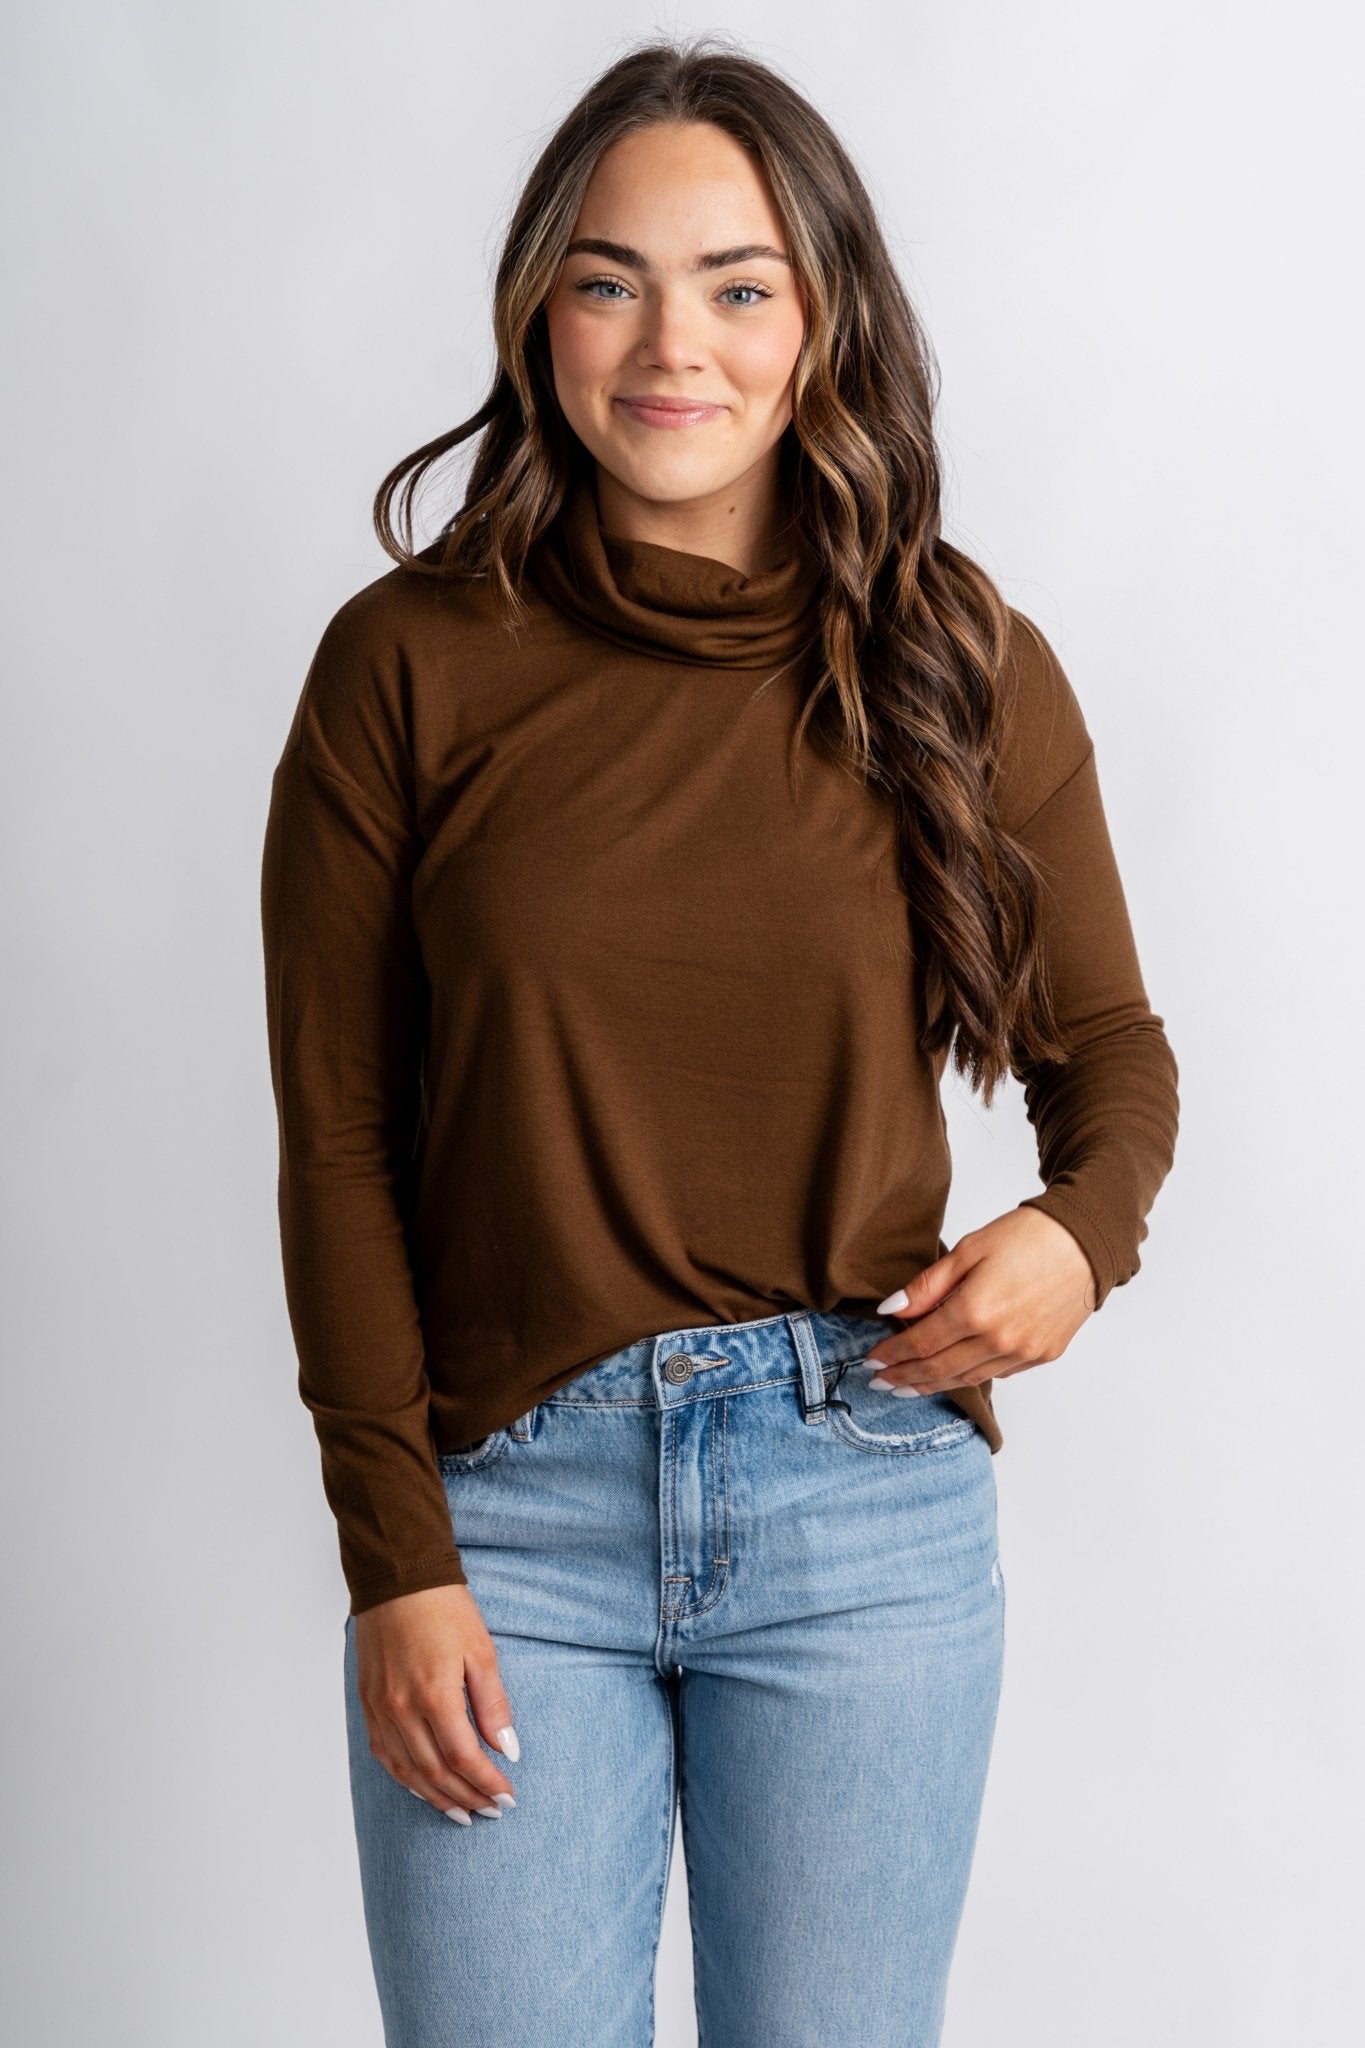 Mock cowl neck long sleeve top espresso – Stylish Sweaters | Boutique Sweaters at Lush Fashion Lounge Boutique in Oklahoma City